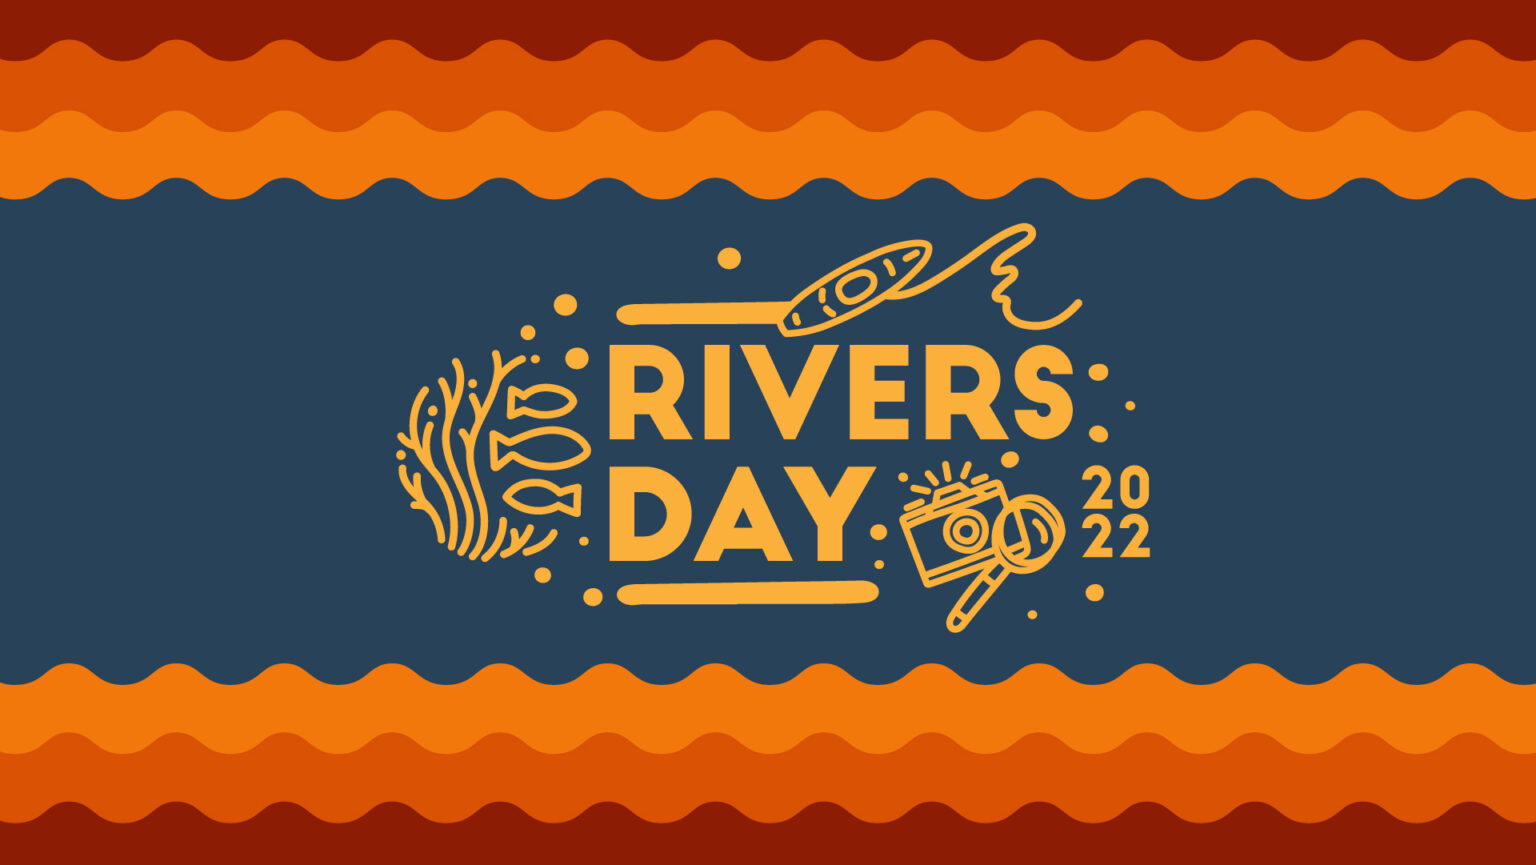 Rivers Day 2022? River Days! OETZ TROPHY